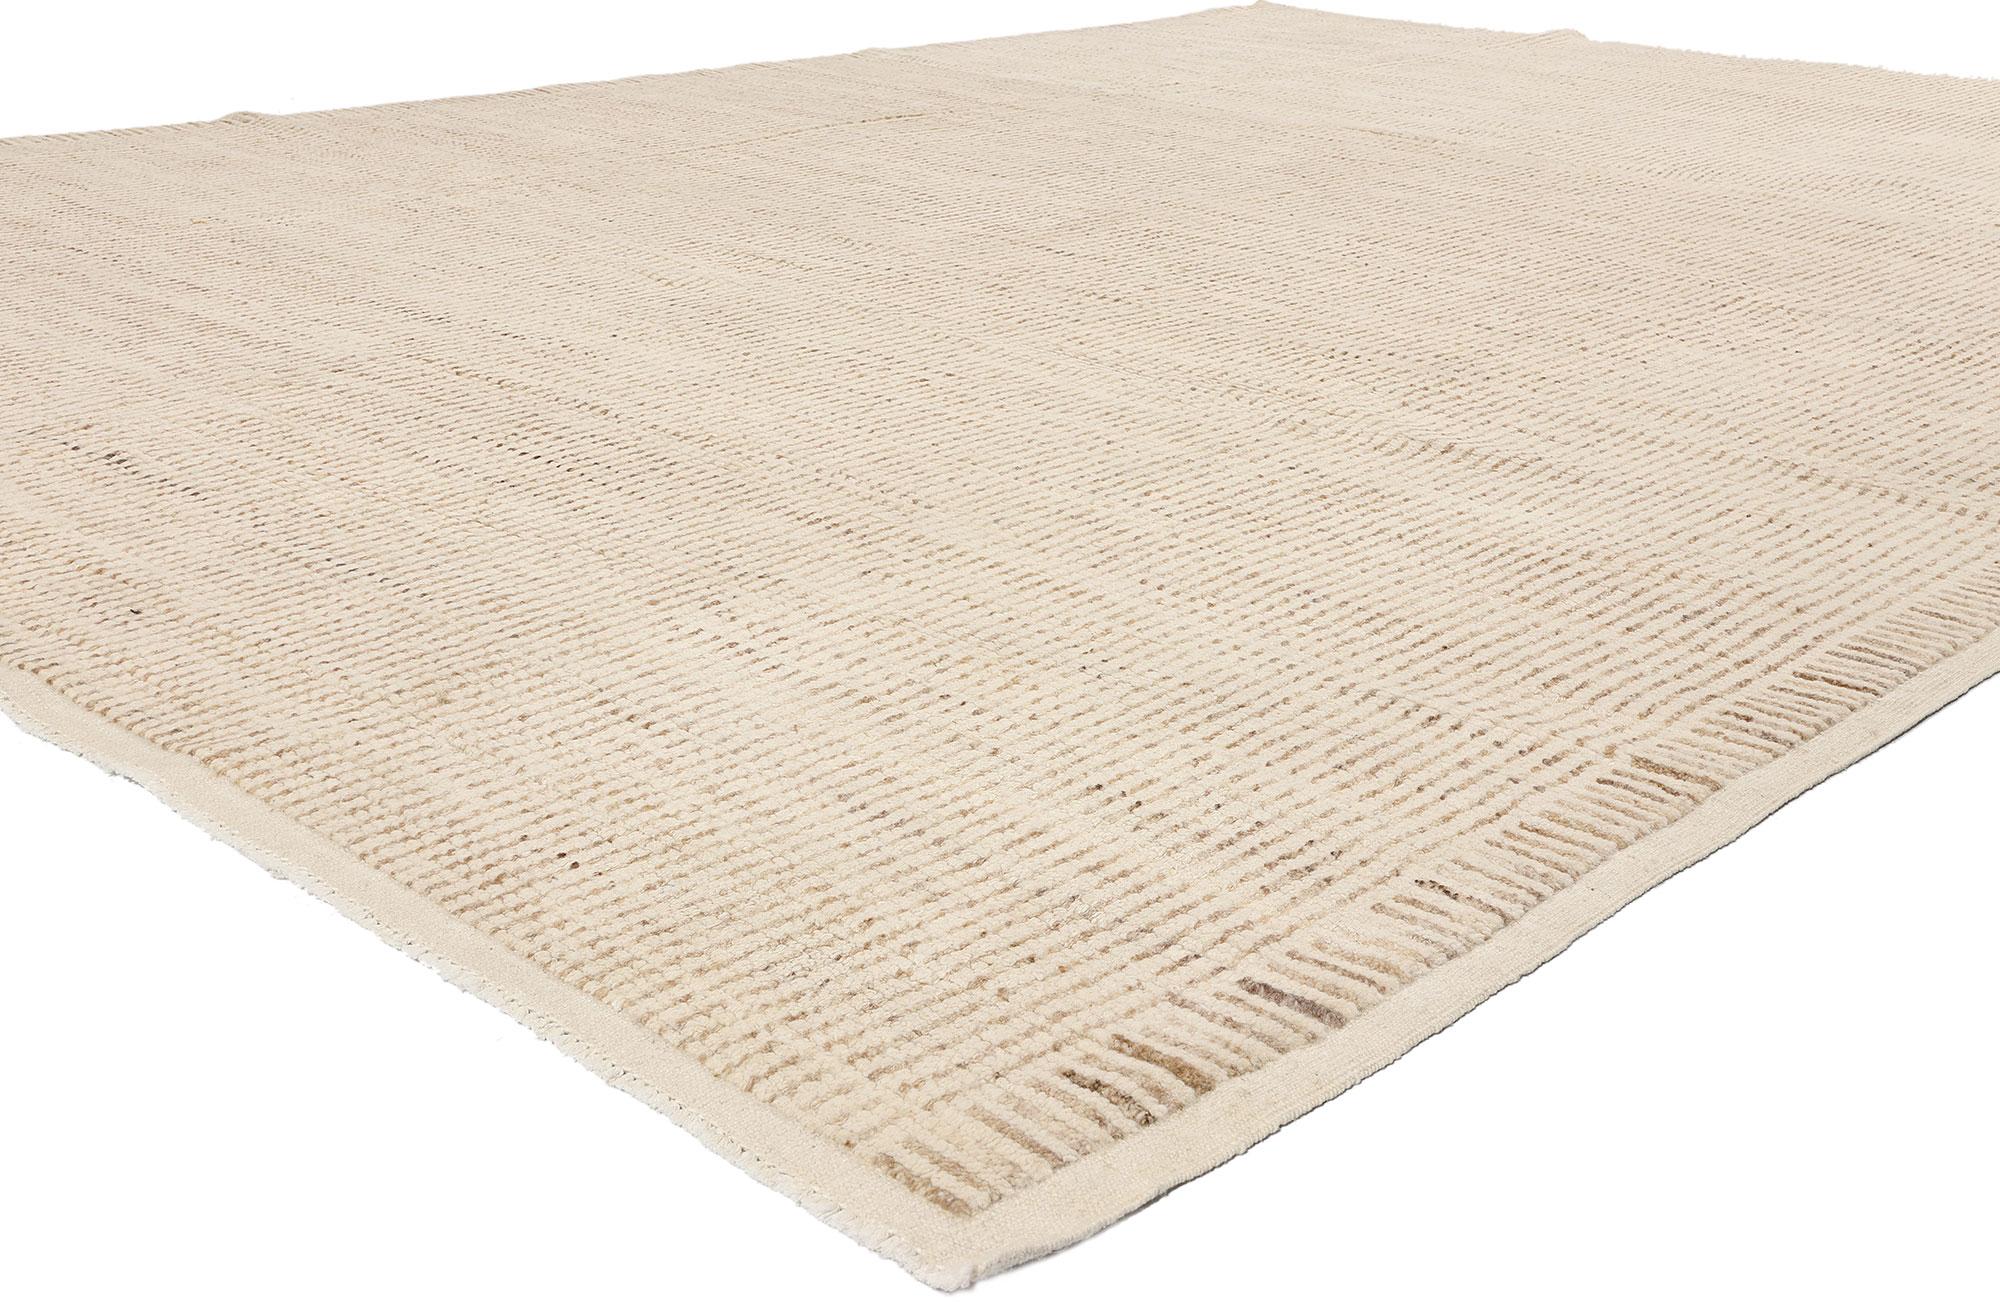 81077 Organic Modern Skagen Moroccan Rug, 09'01 x 12'06. Step into a realm of understated elegance and tranquil comfort with our hand-knotted wool Organic Modern Skagen Moroccan area rug. Crafted with meticulous care and attention to detail, this